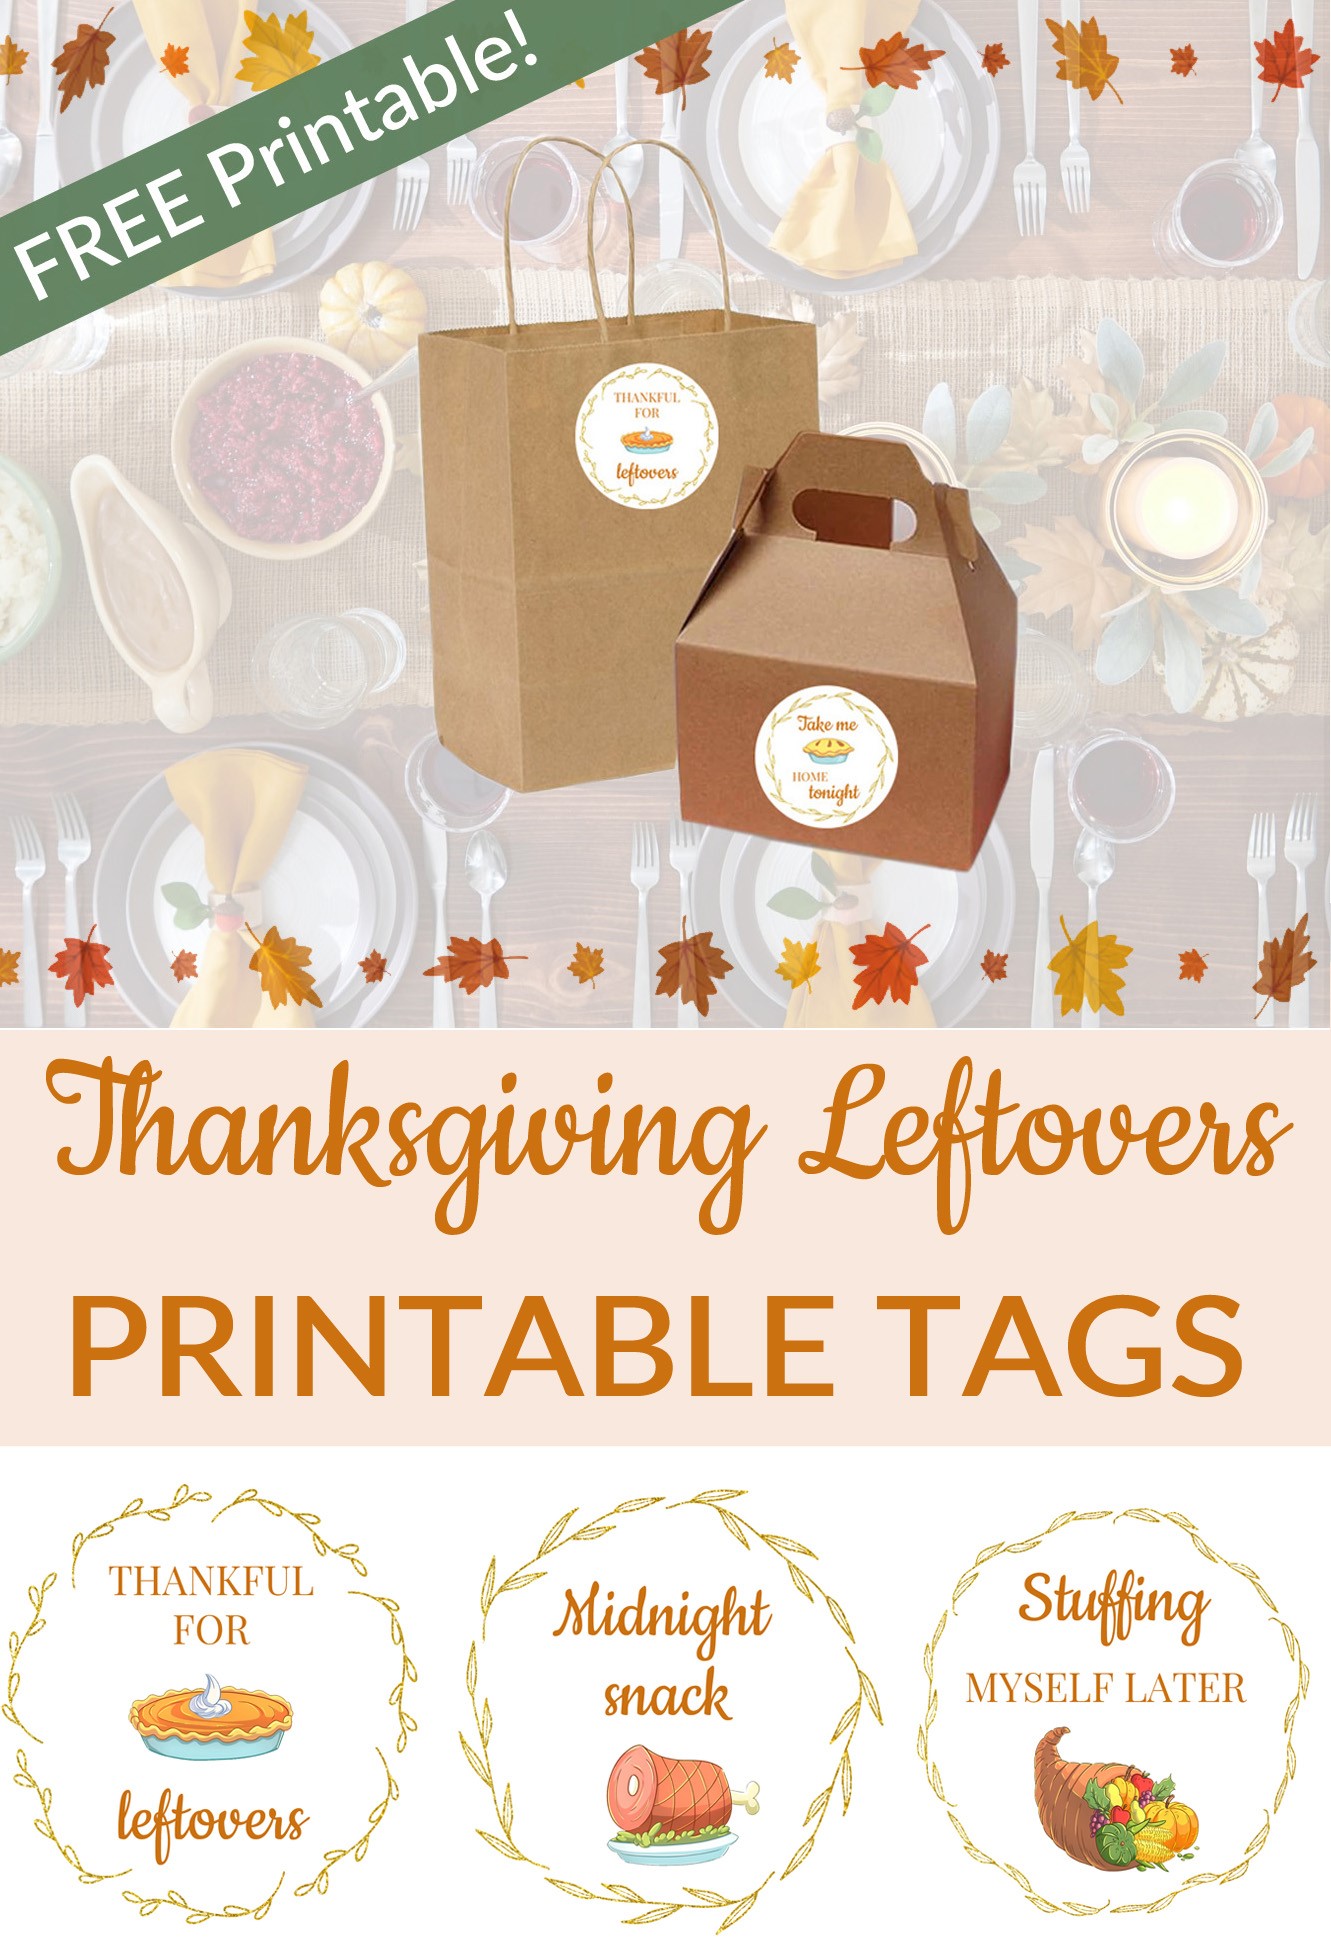 Thanksgiving Leftovers Printable Tags - For the Love of Food